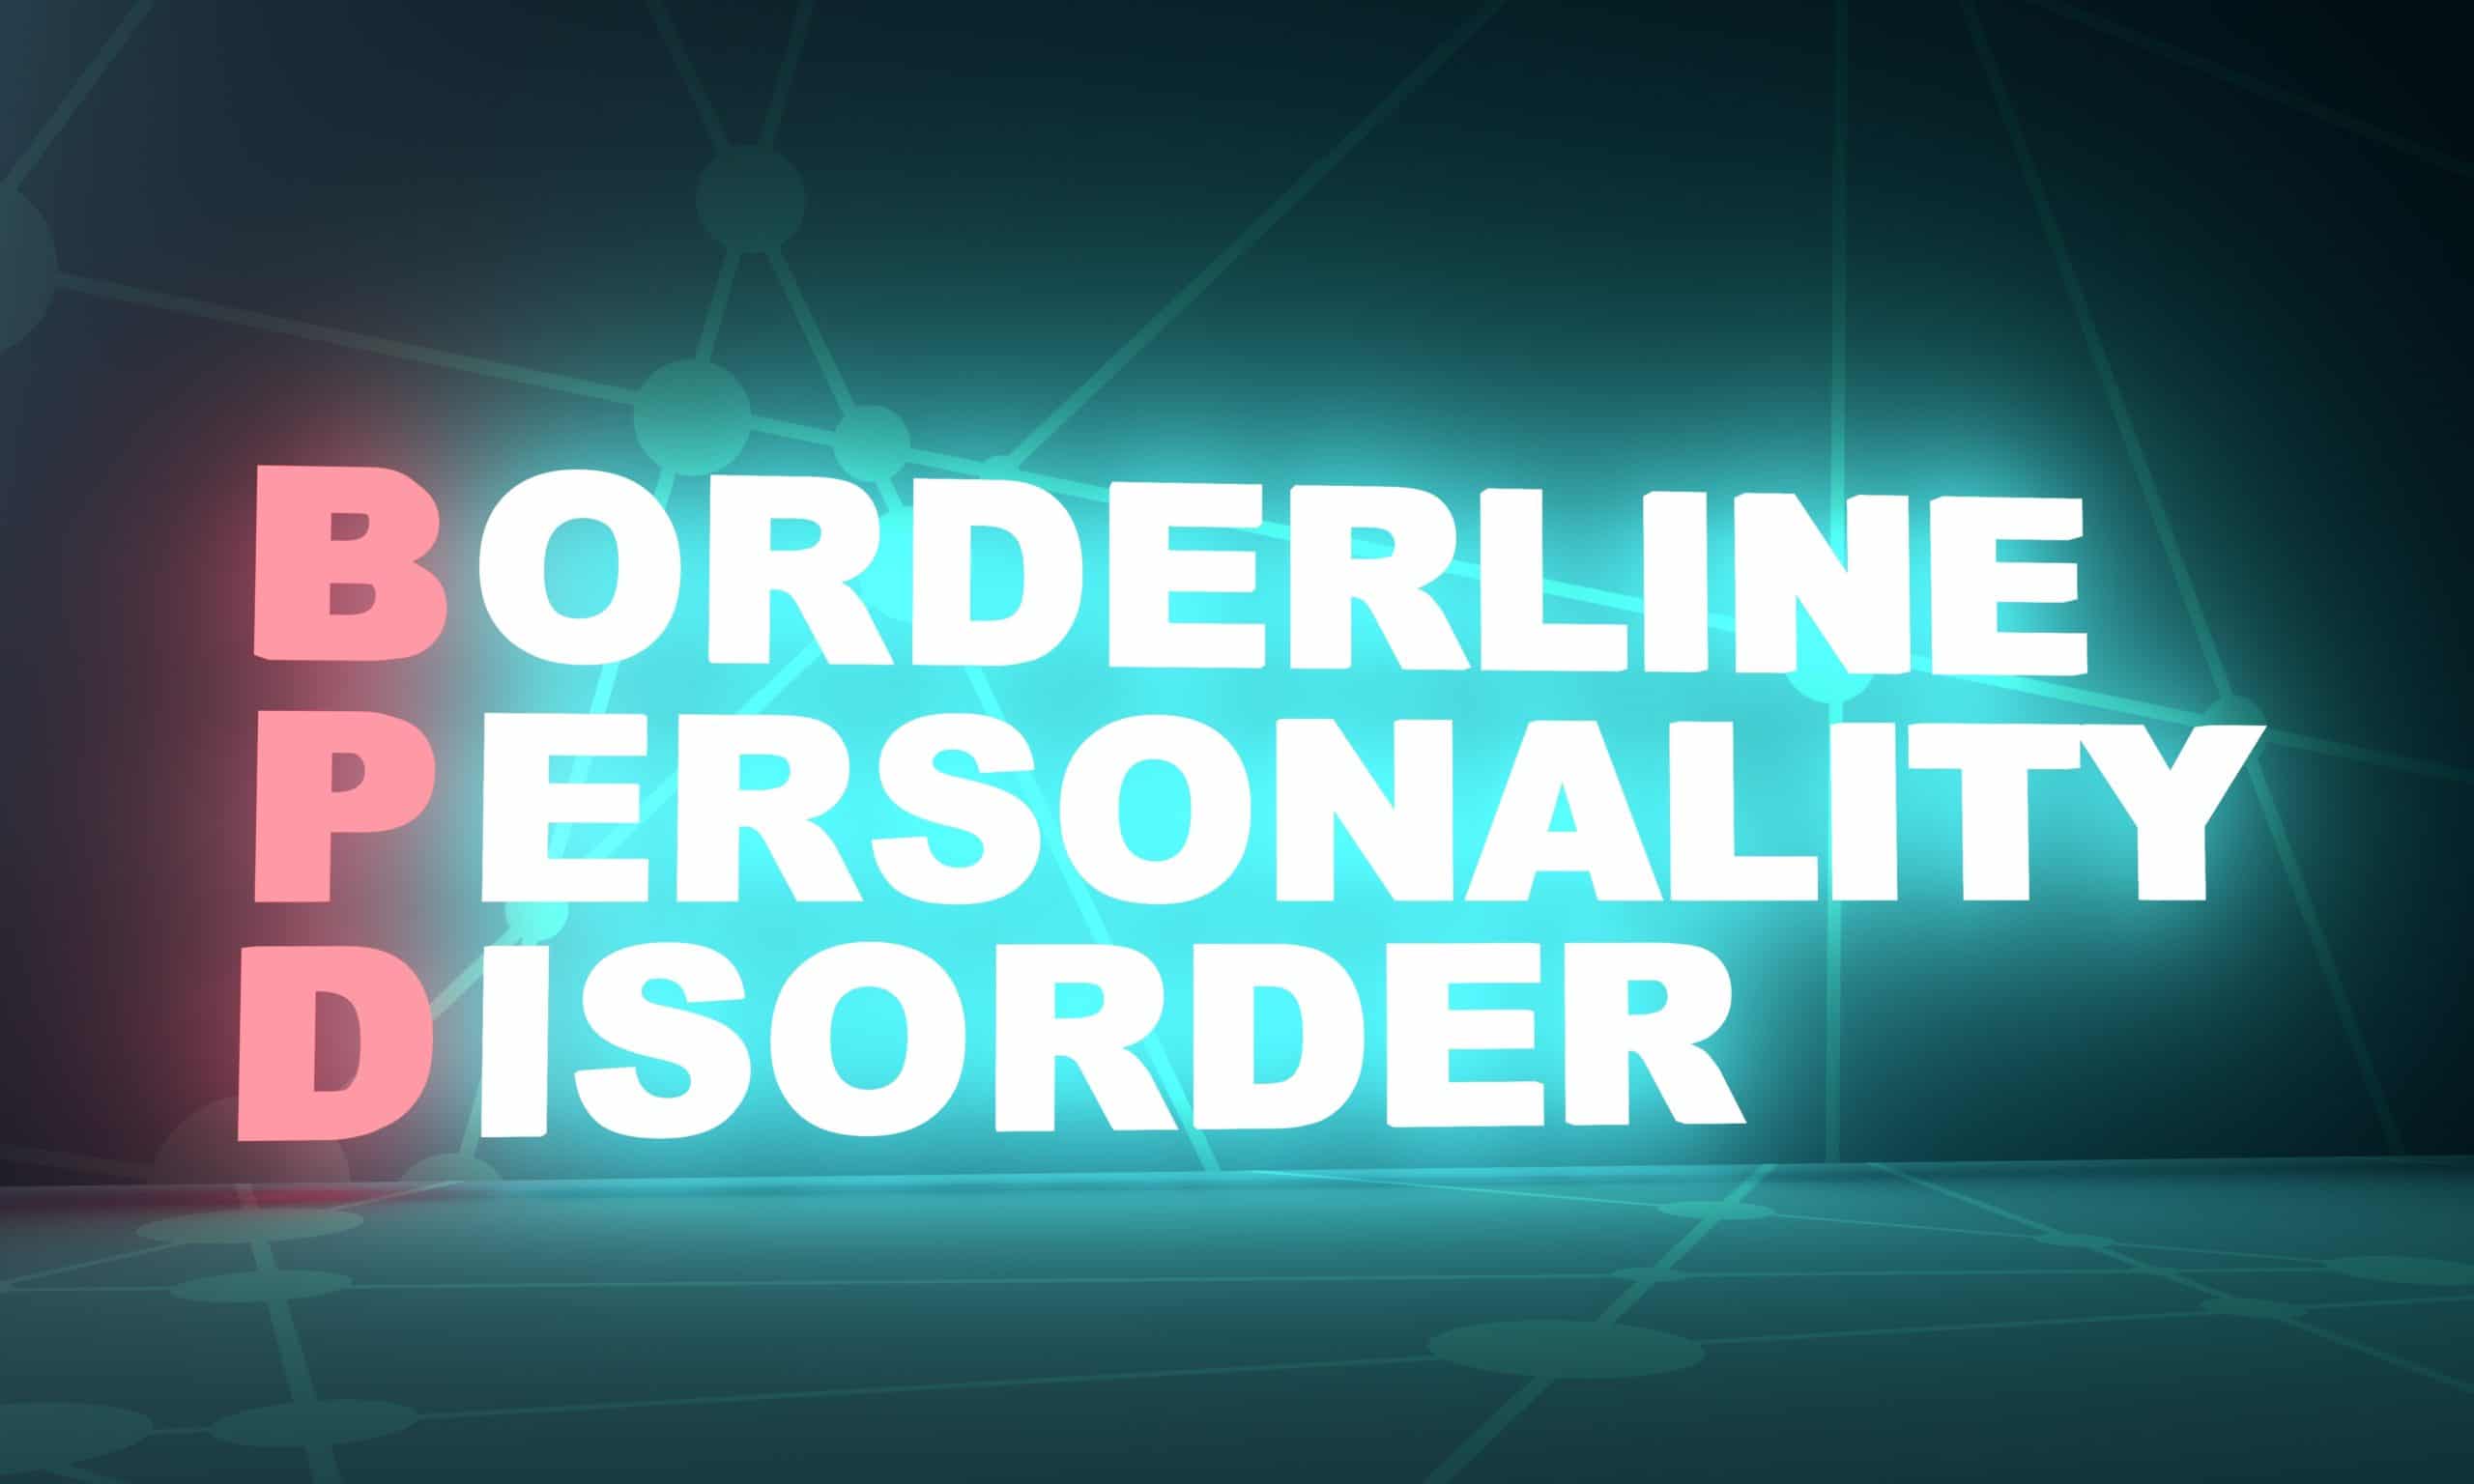 Borderline Personality Disorder. Helthcare conceptual image. 3D rendering. Neon bulb illumination